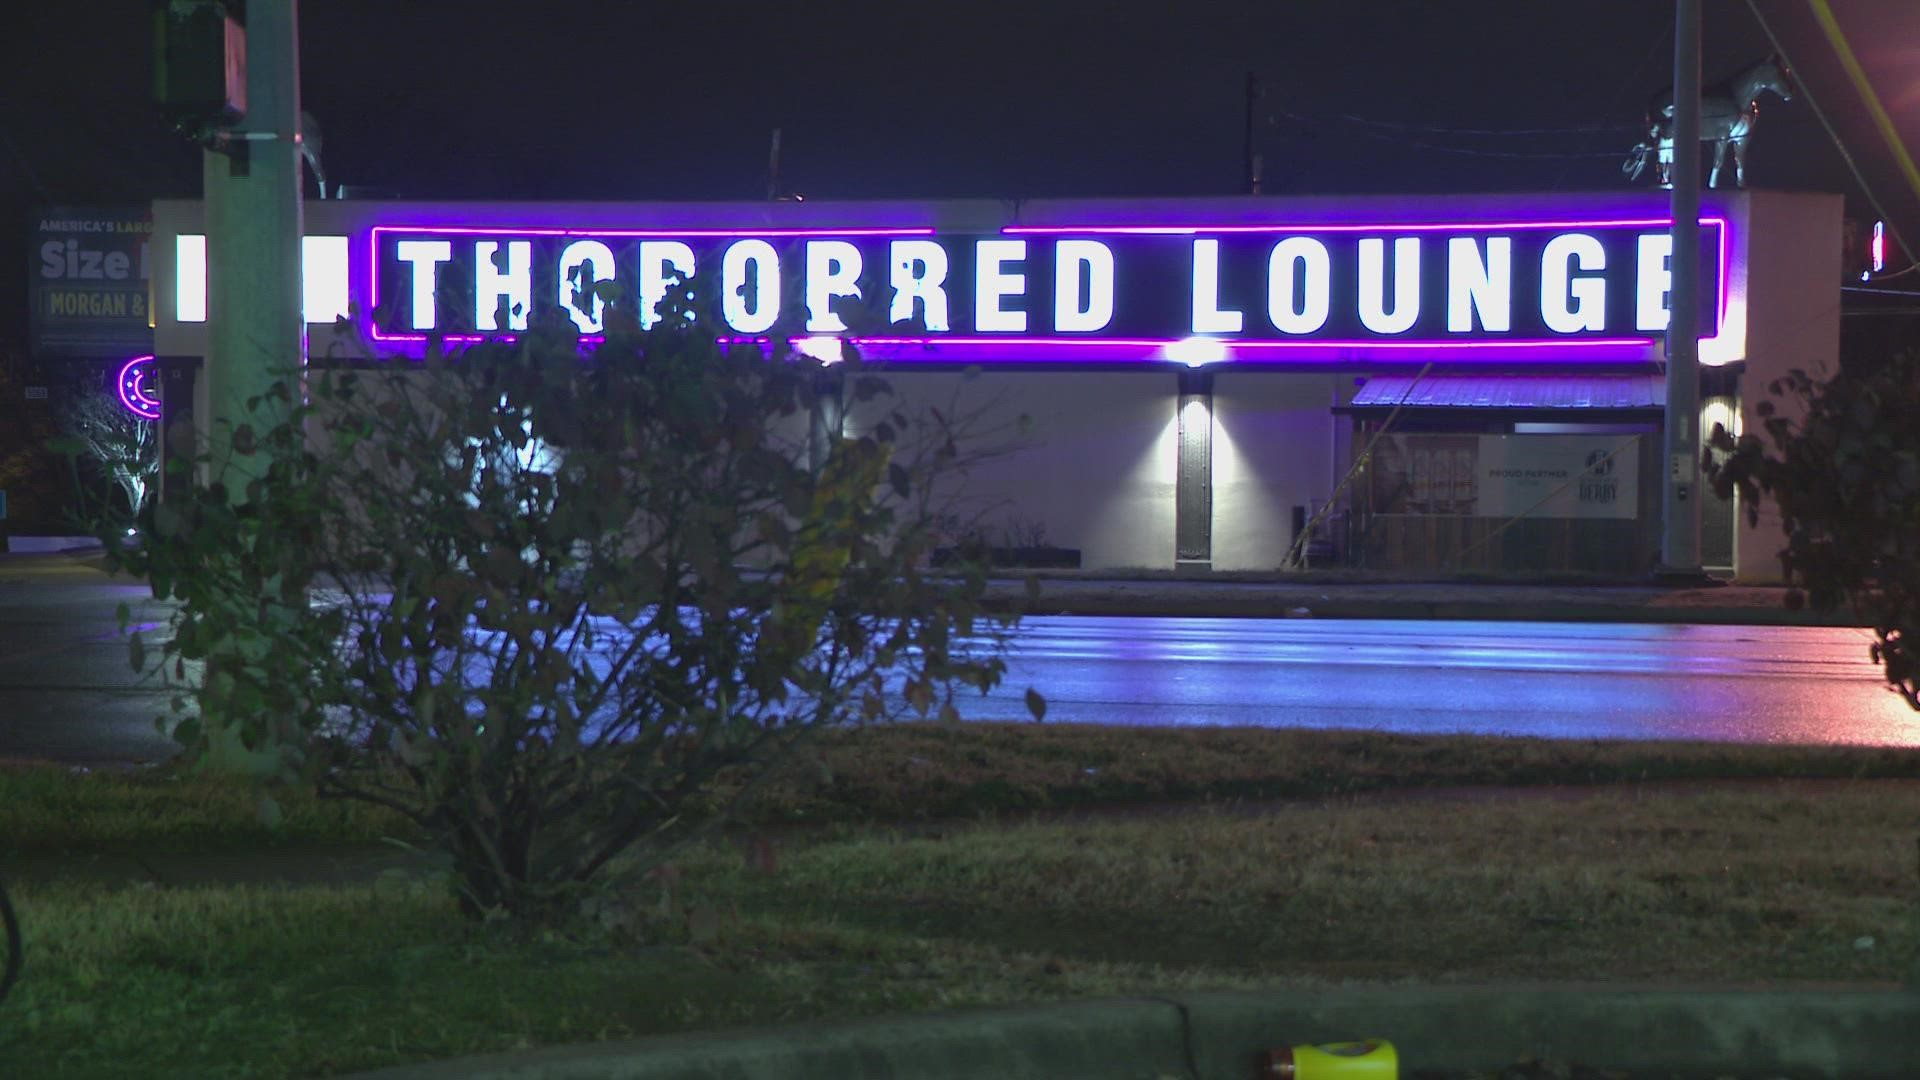 Around 3:30 a.m. on Sunday, police were dispatched to the Thorobred Lounge where they found a woman suffering from a gunshot wound.